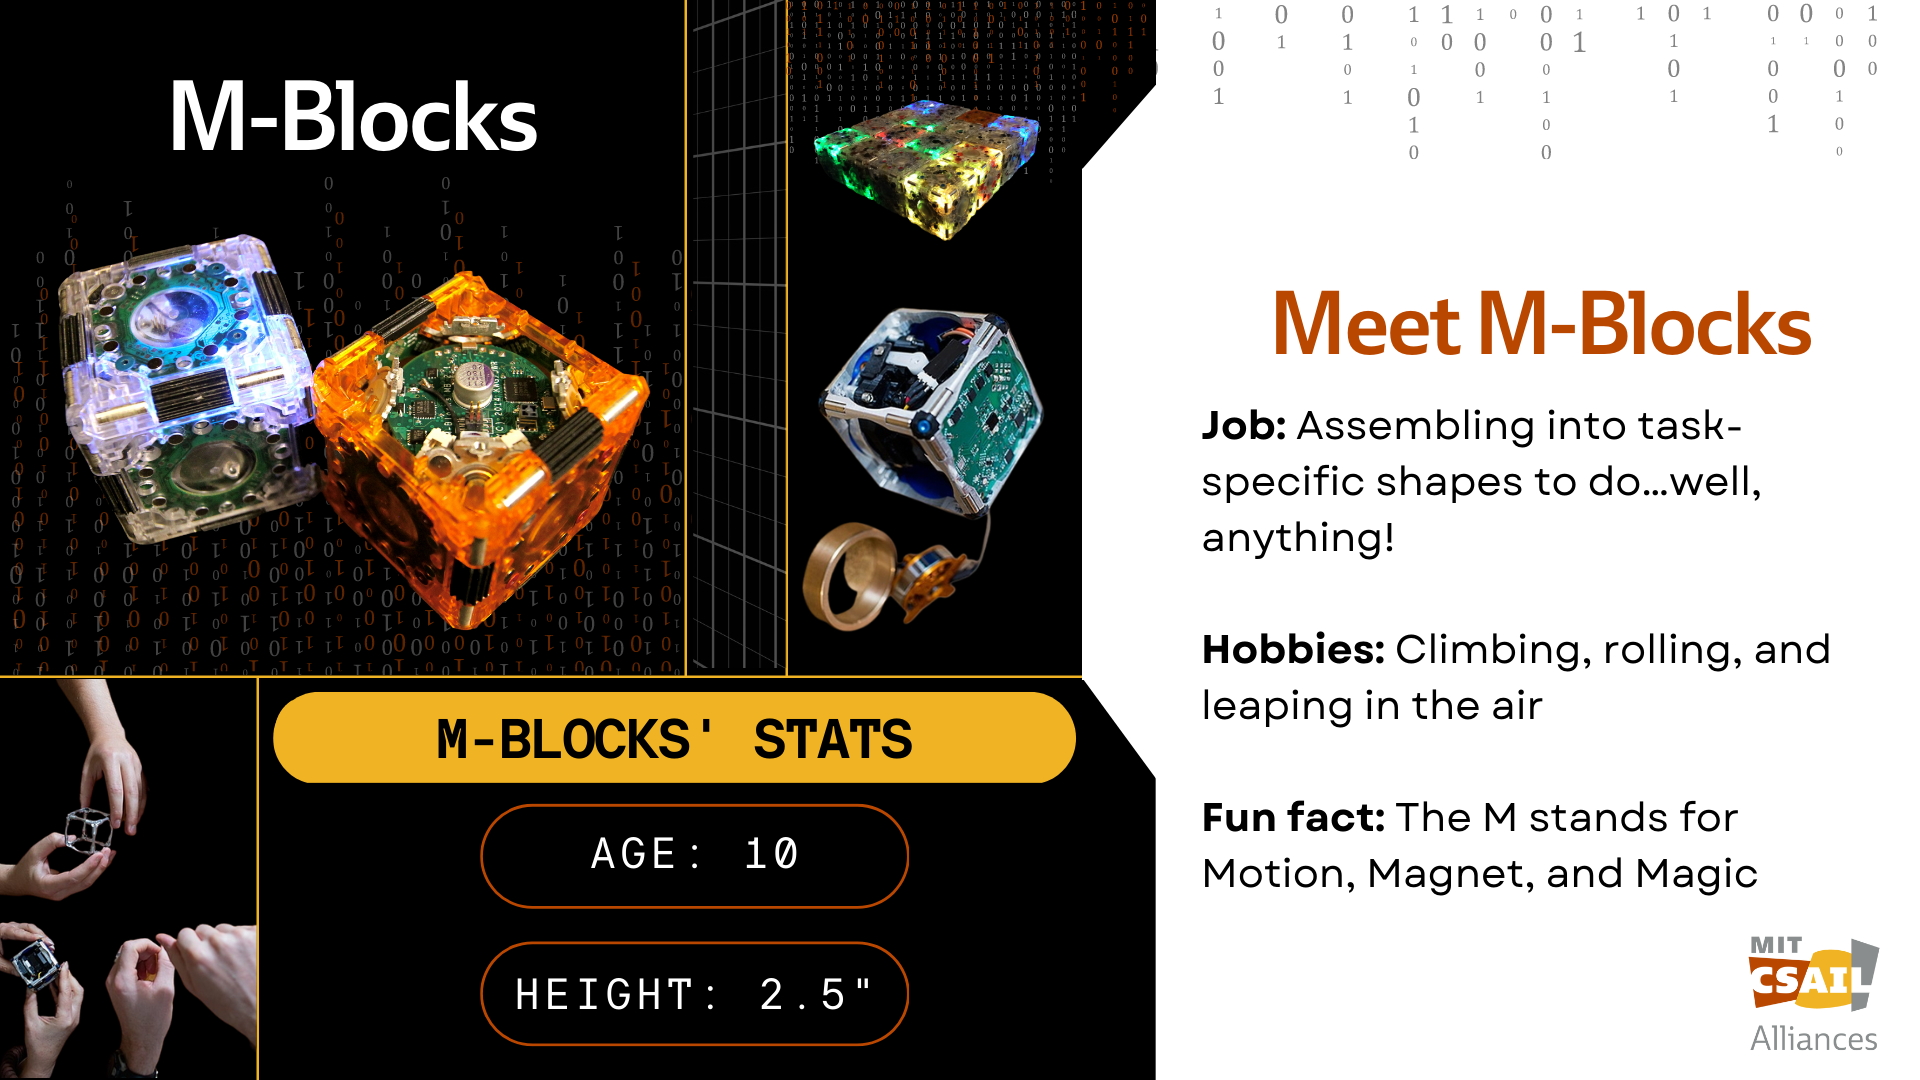 Mblocks robotic cubes with text that reads "M-Blocks"